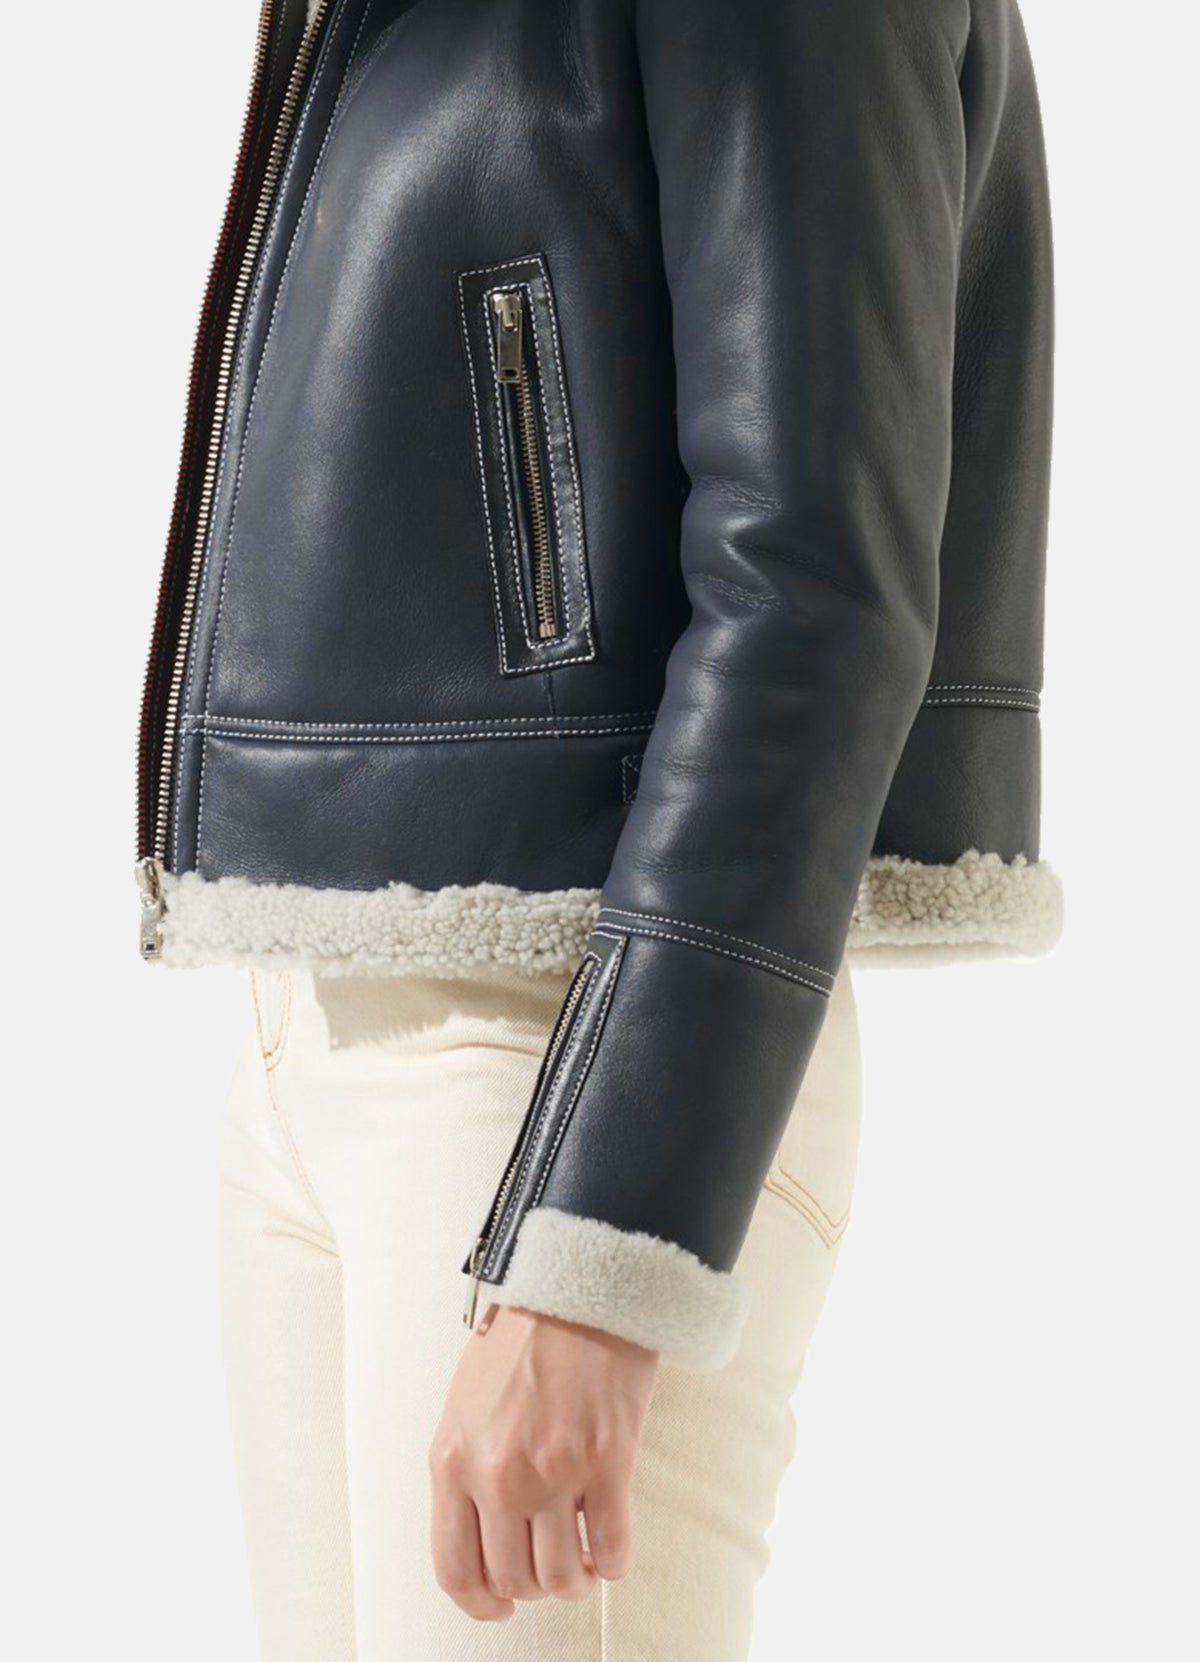 Womens Navy Blue Shearling Leather Jacket